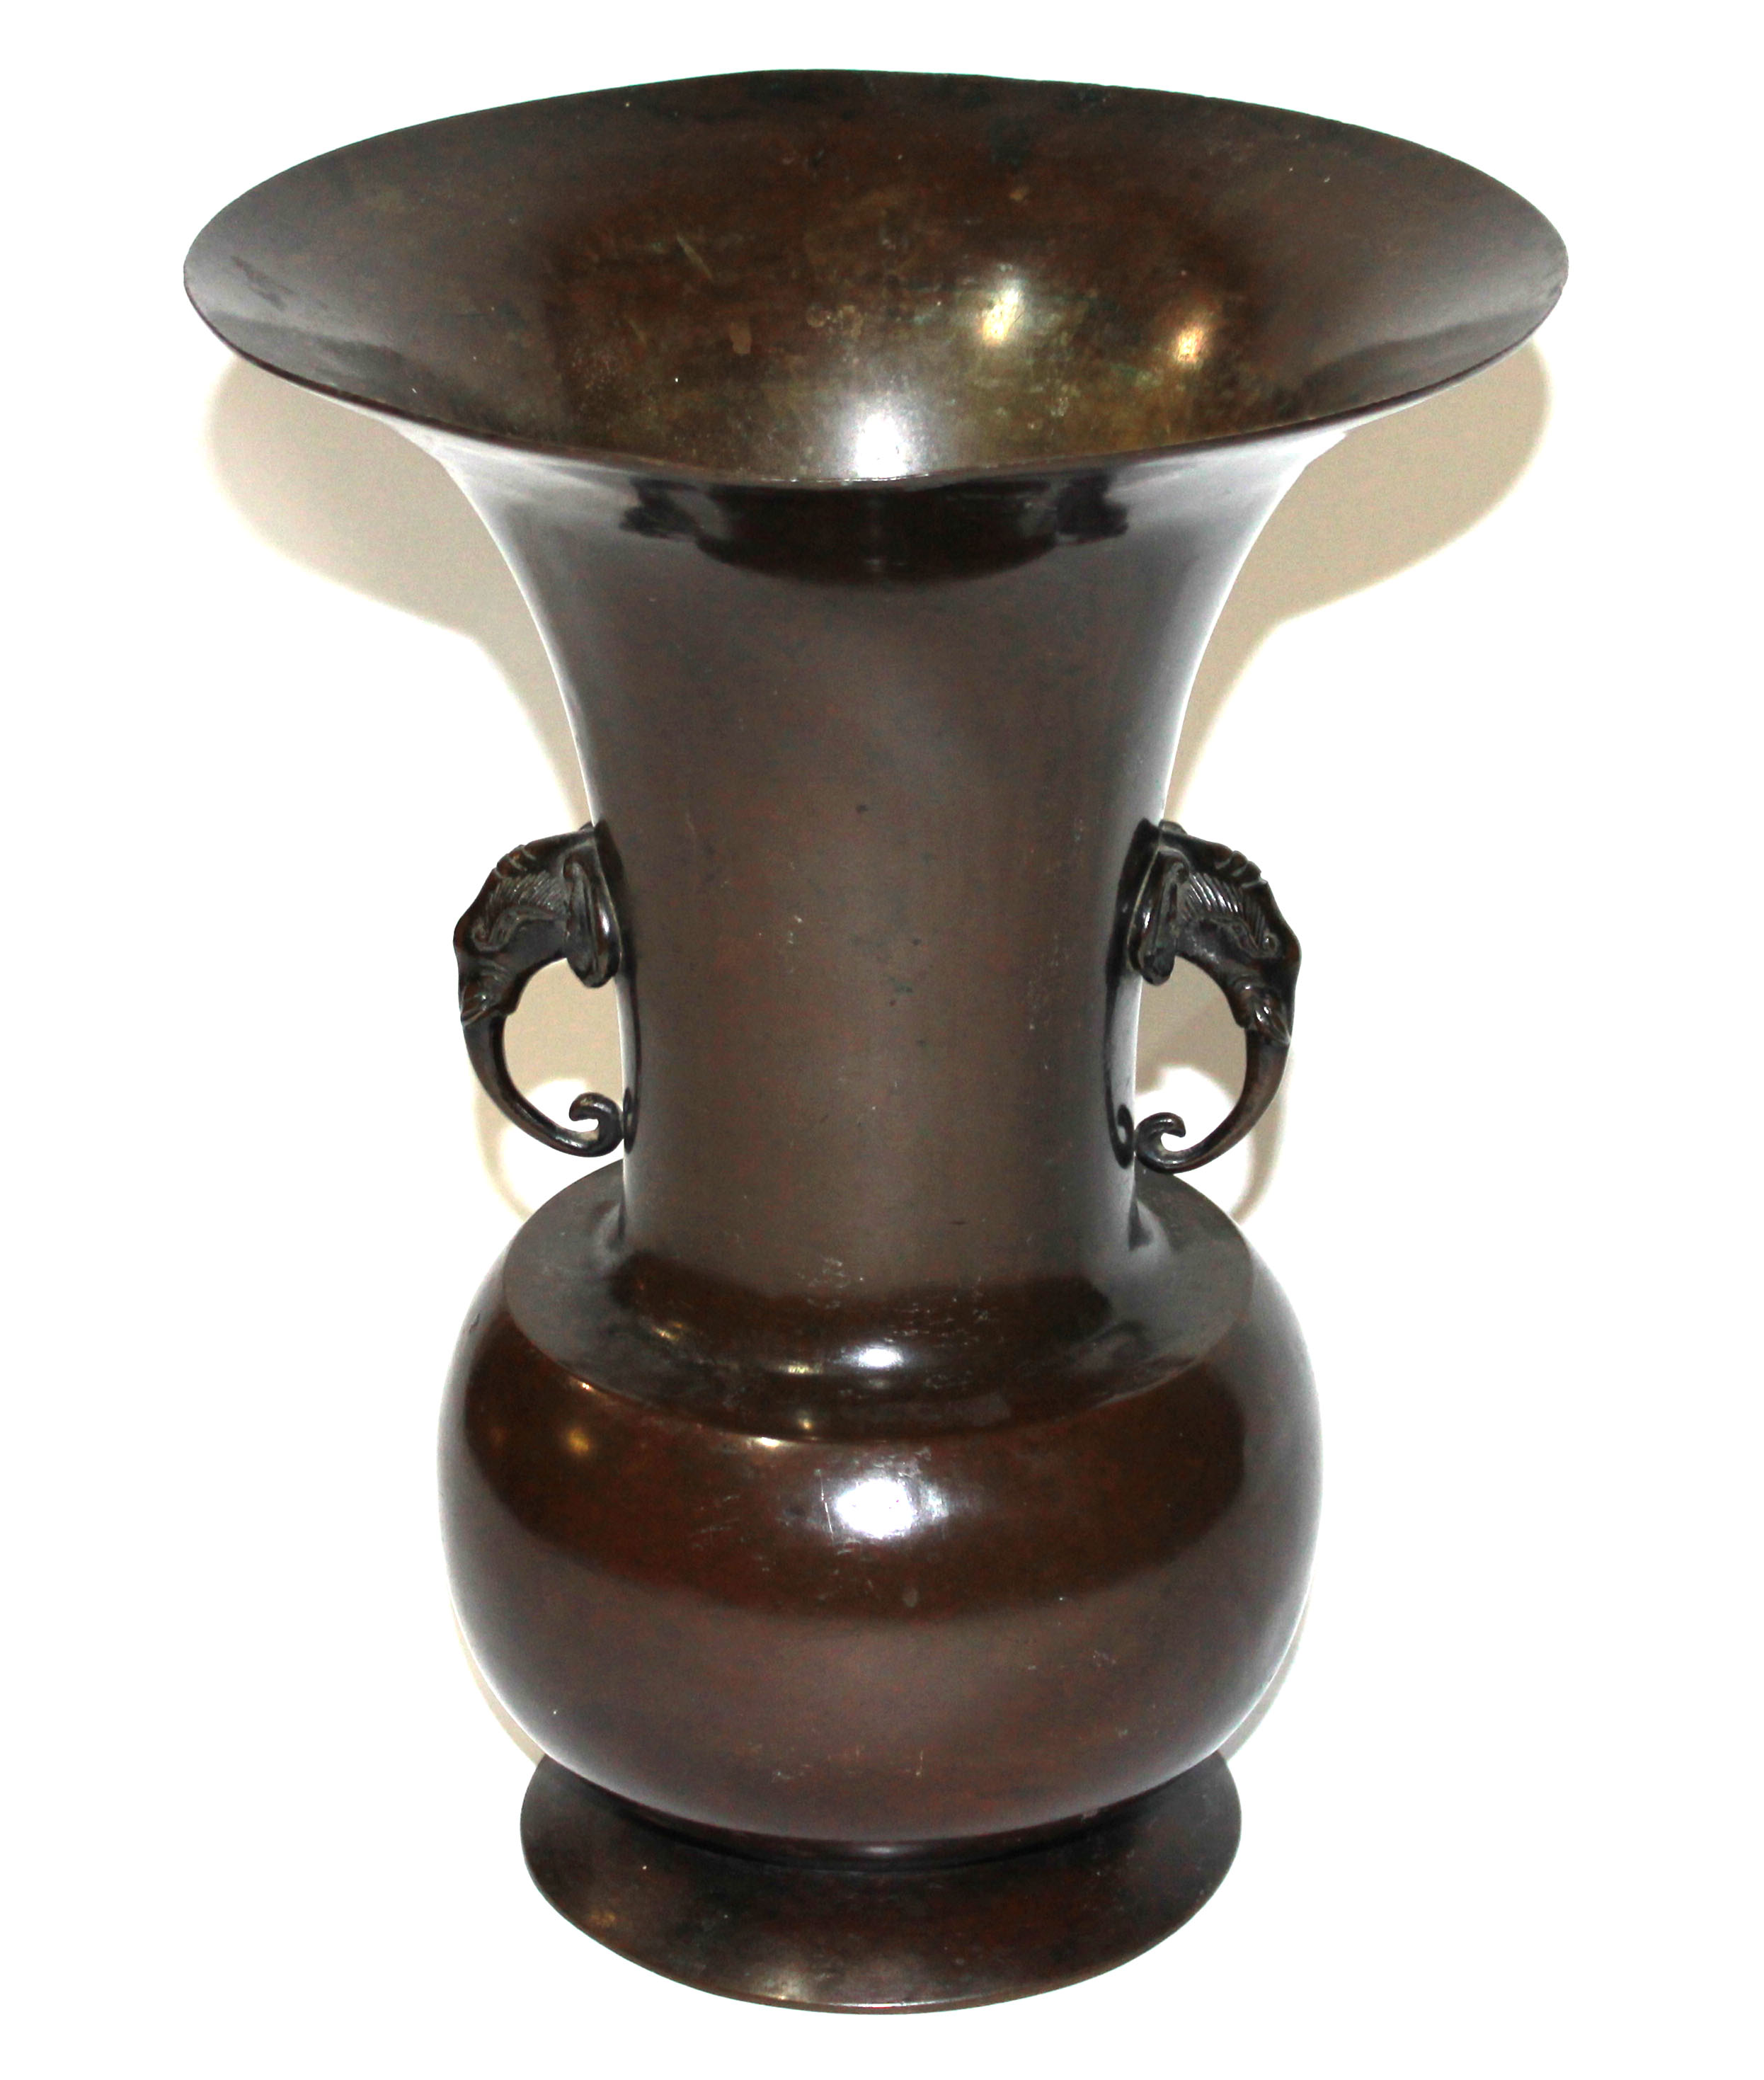 A LARGE JAPANESE BRONZE VASE, CIRCA 1800 With dark brown patination, the flared neck rising from the